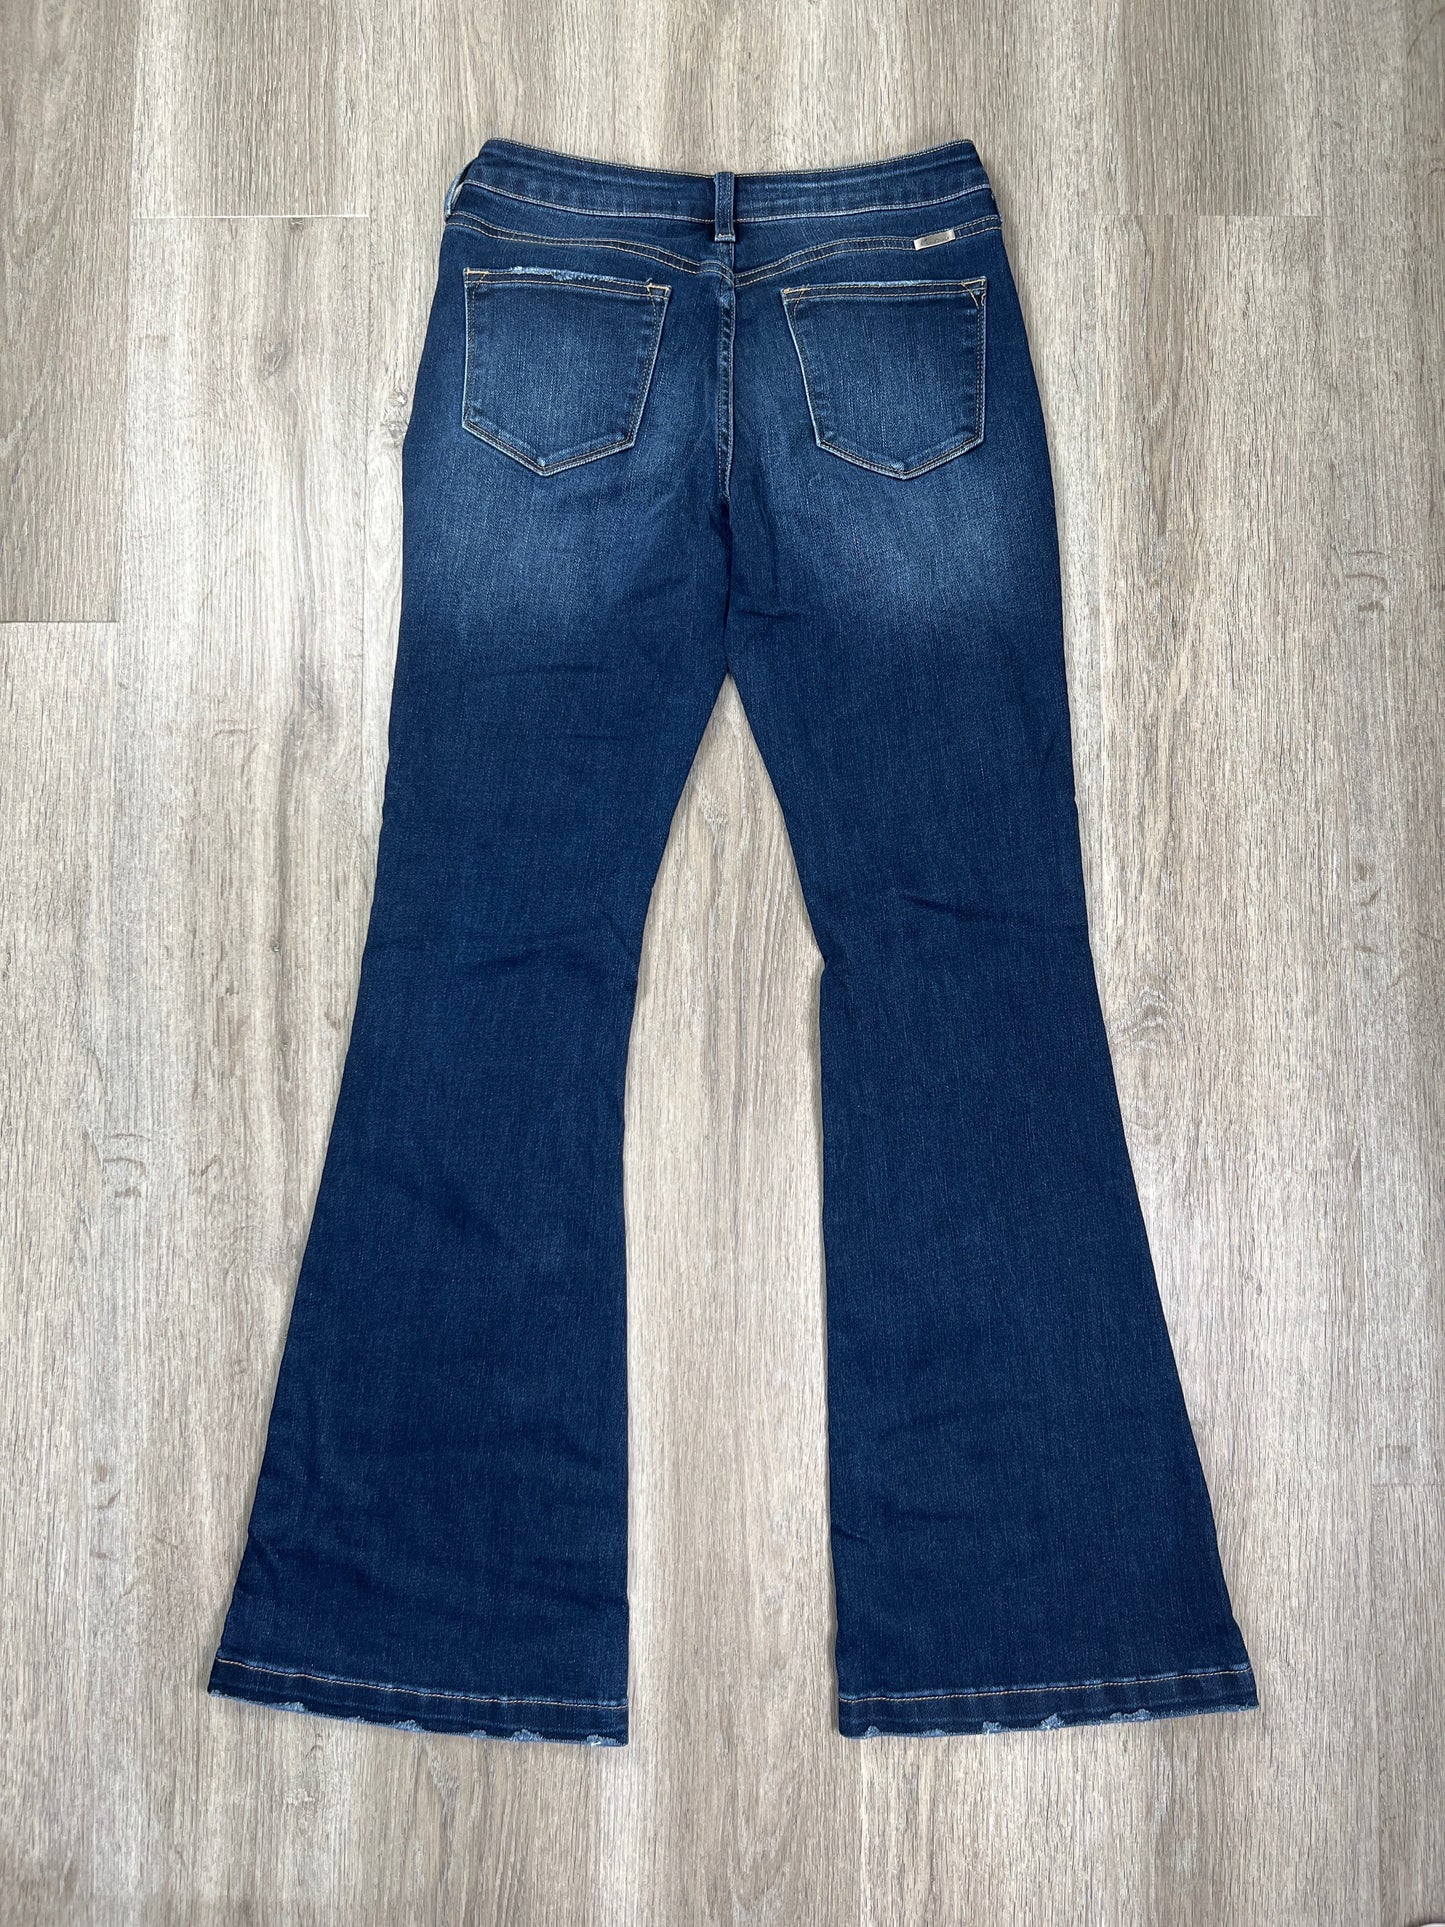 Jeans Flared By Kancan  Size: 8